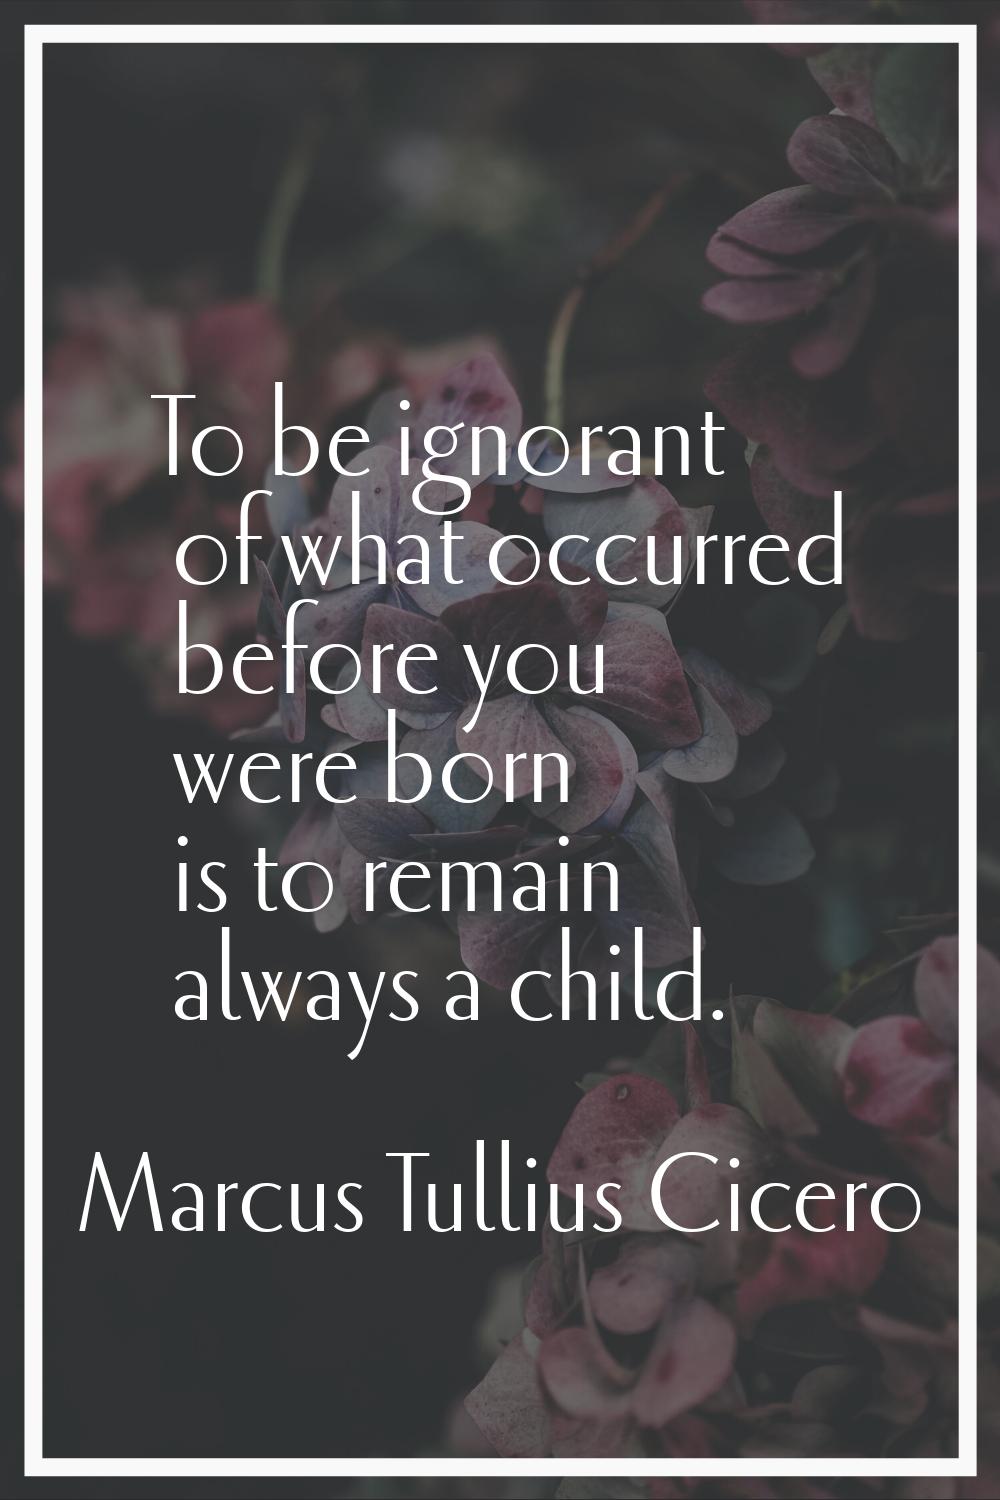 To be ignorant of what occurred before you were born is to remain always a child.